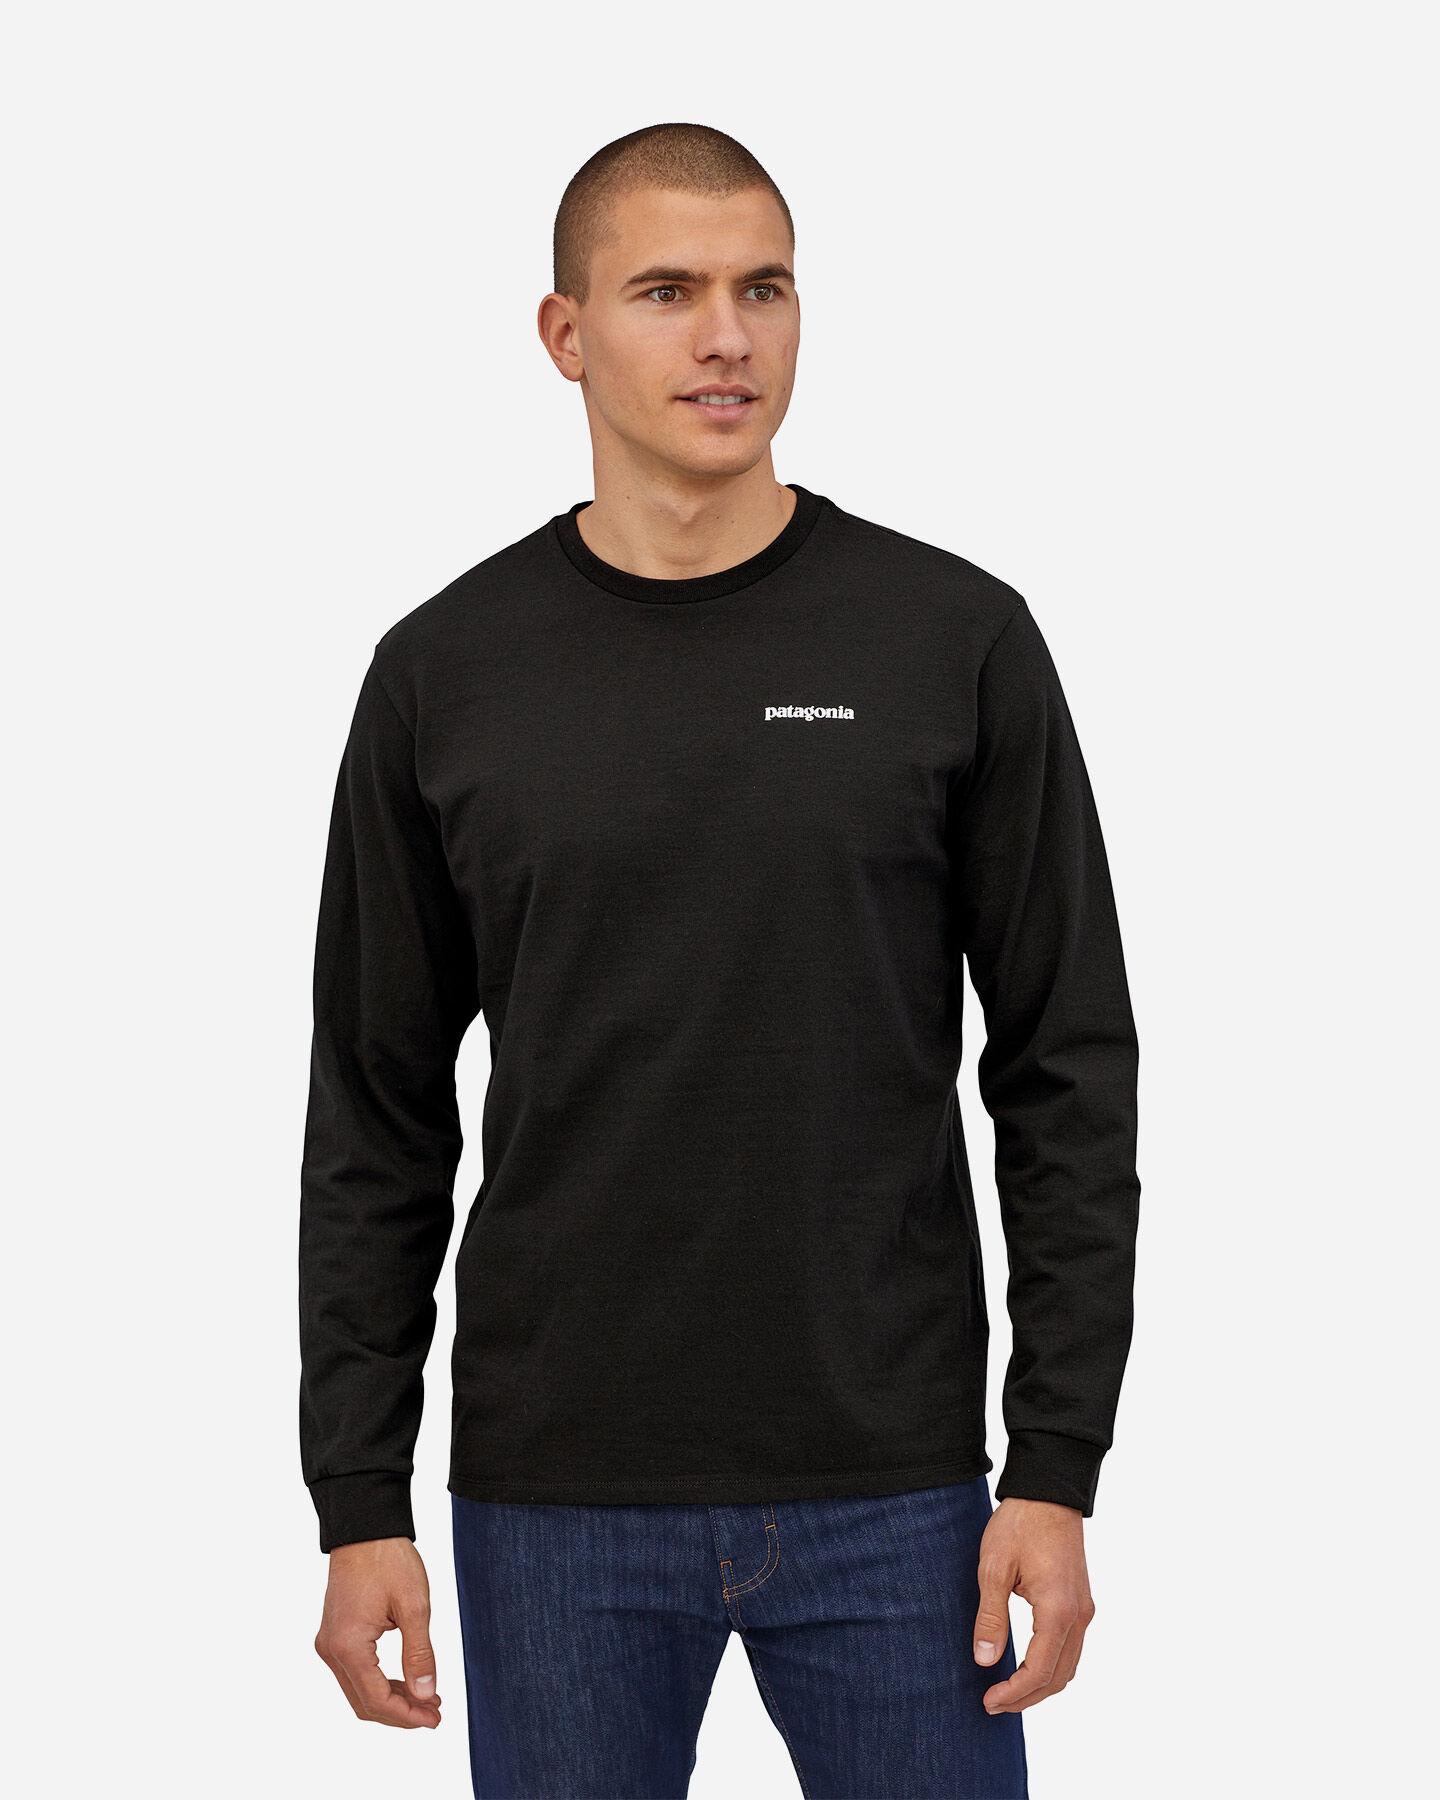  T-Shirt PATAGONIA P-6 LOGO M S4089229|BLK|L scatto 0